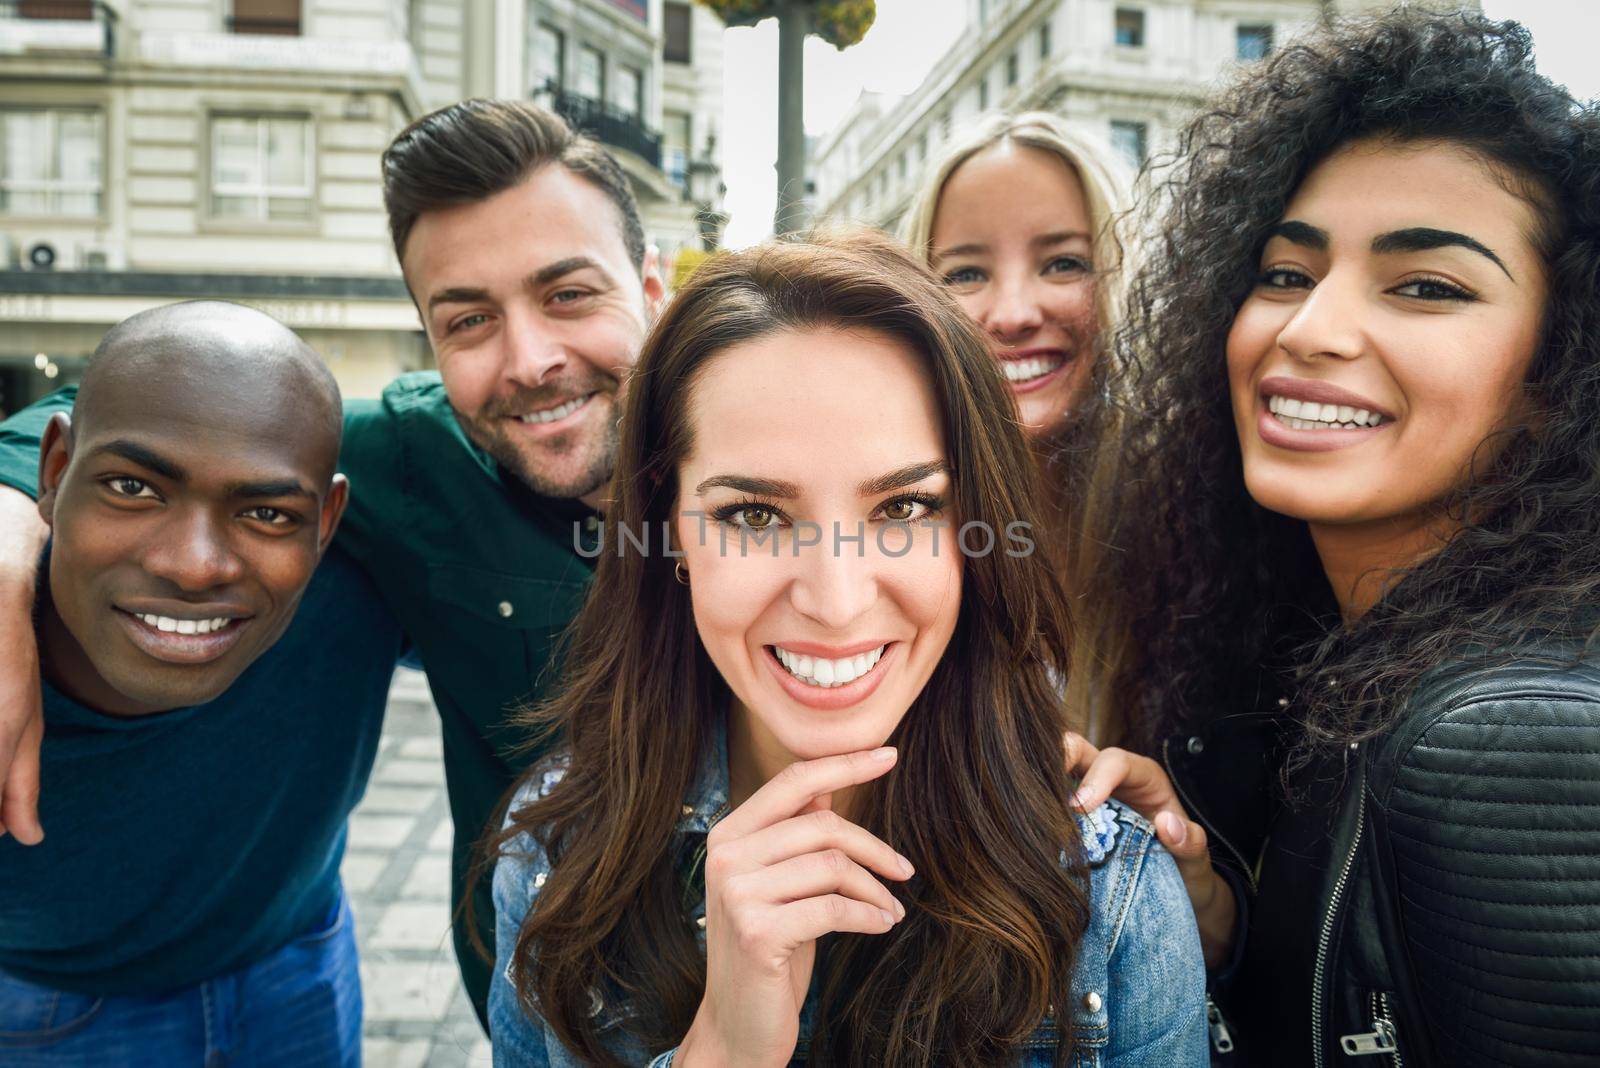 Multiracial group of friends taking selfie in a urban street with a caucasian brunette woman in foreground. Three young women and two men wearing casual clothes.